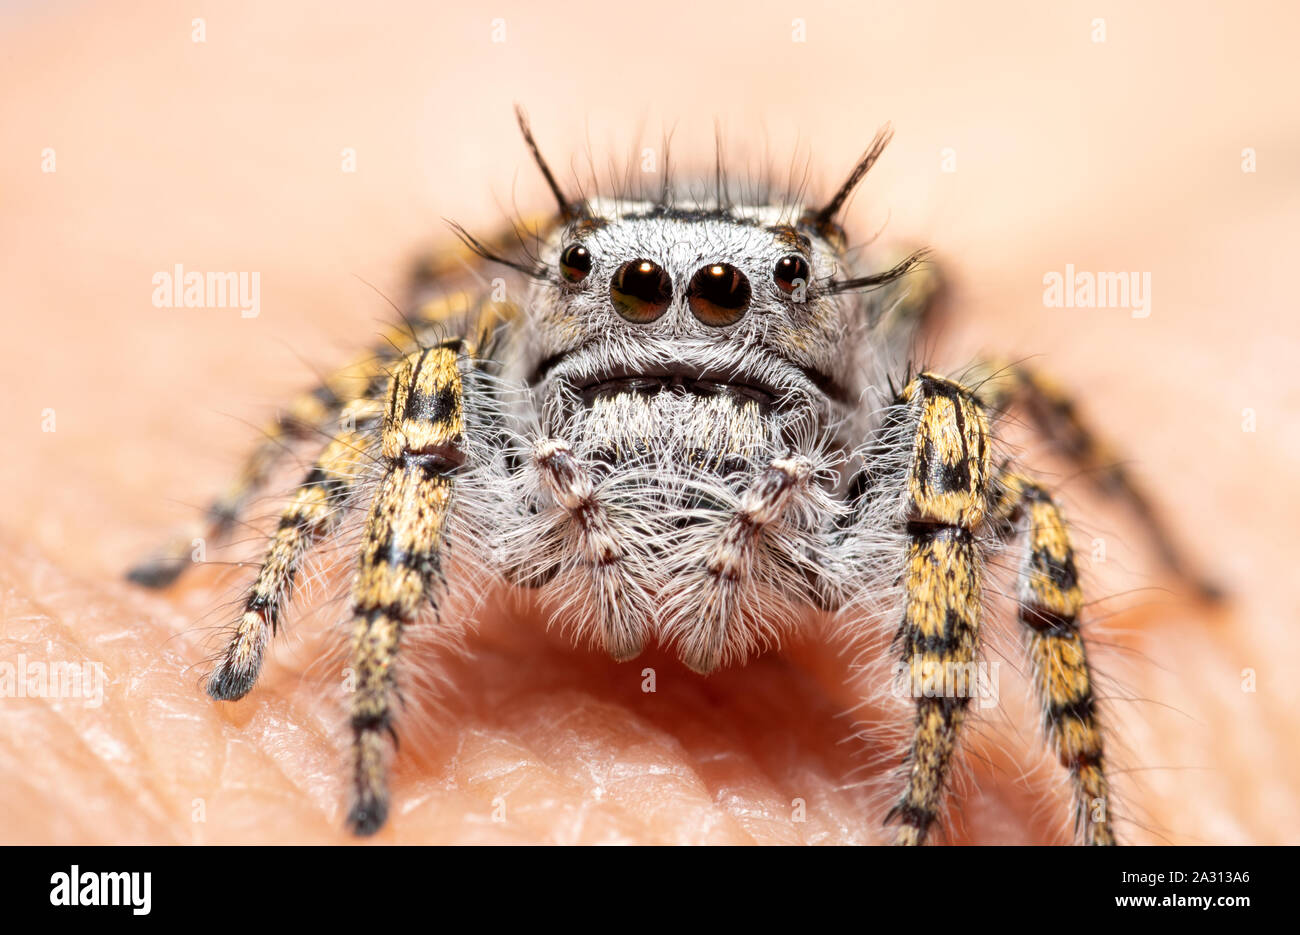 Female Phidippus mystaceus jumping spider sitting on a human finger Stock Photo